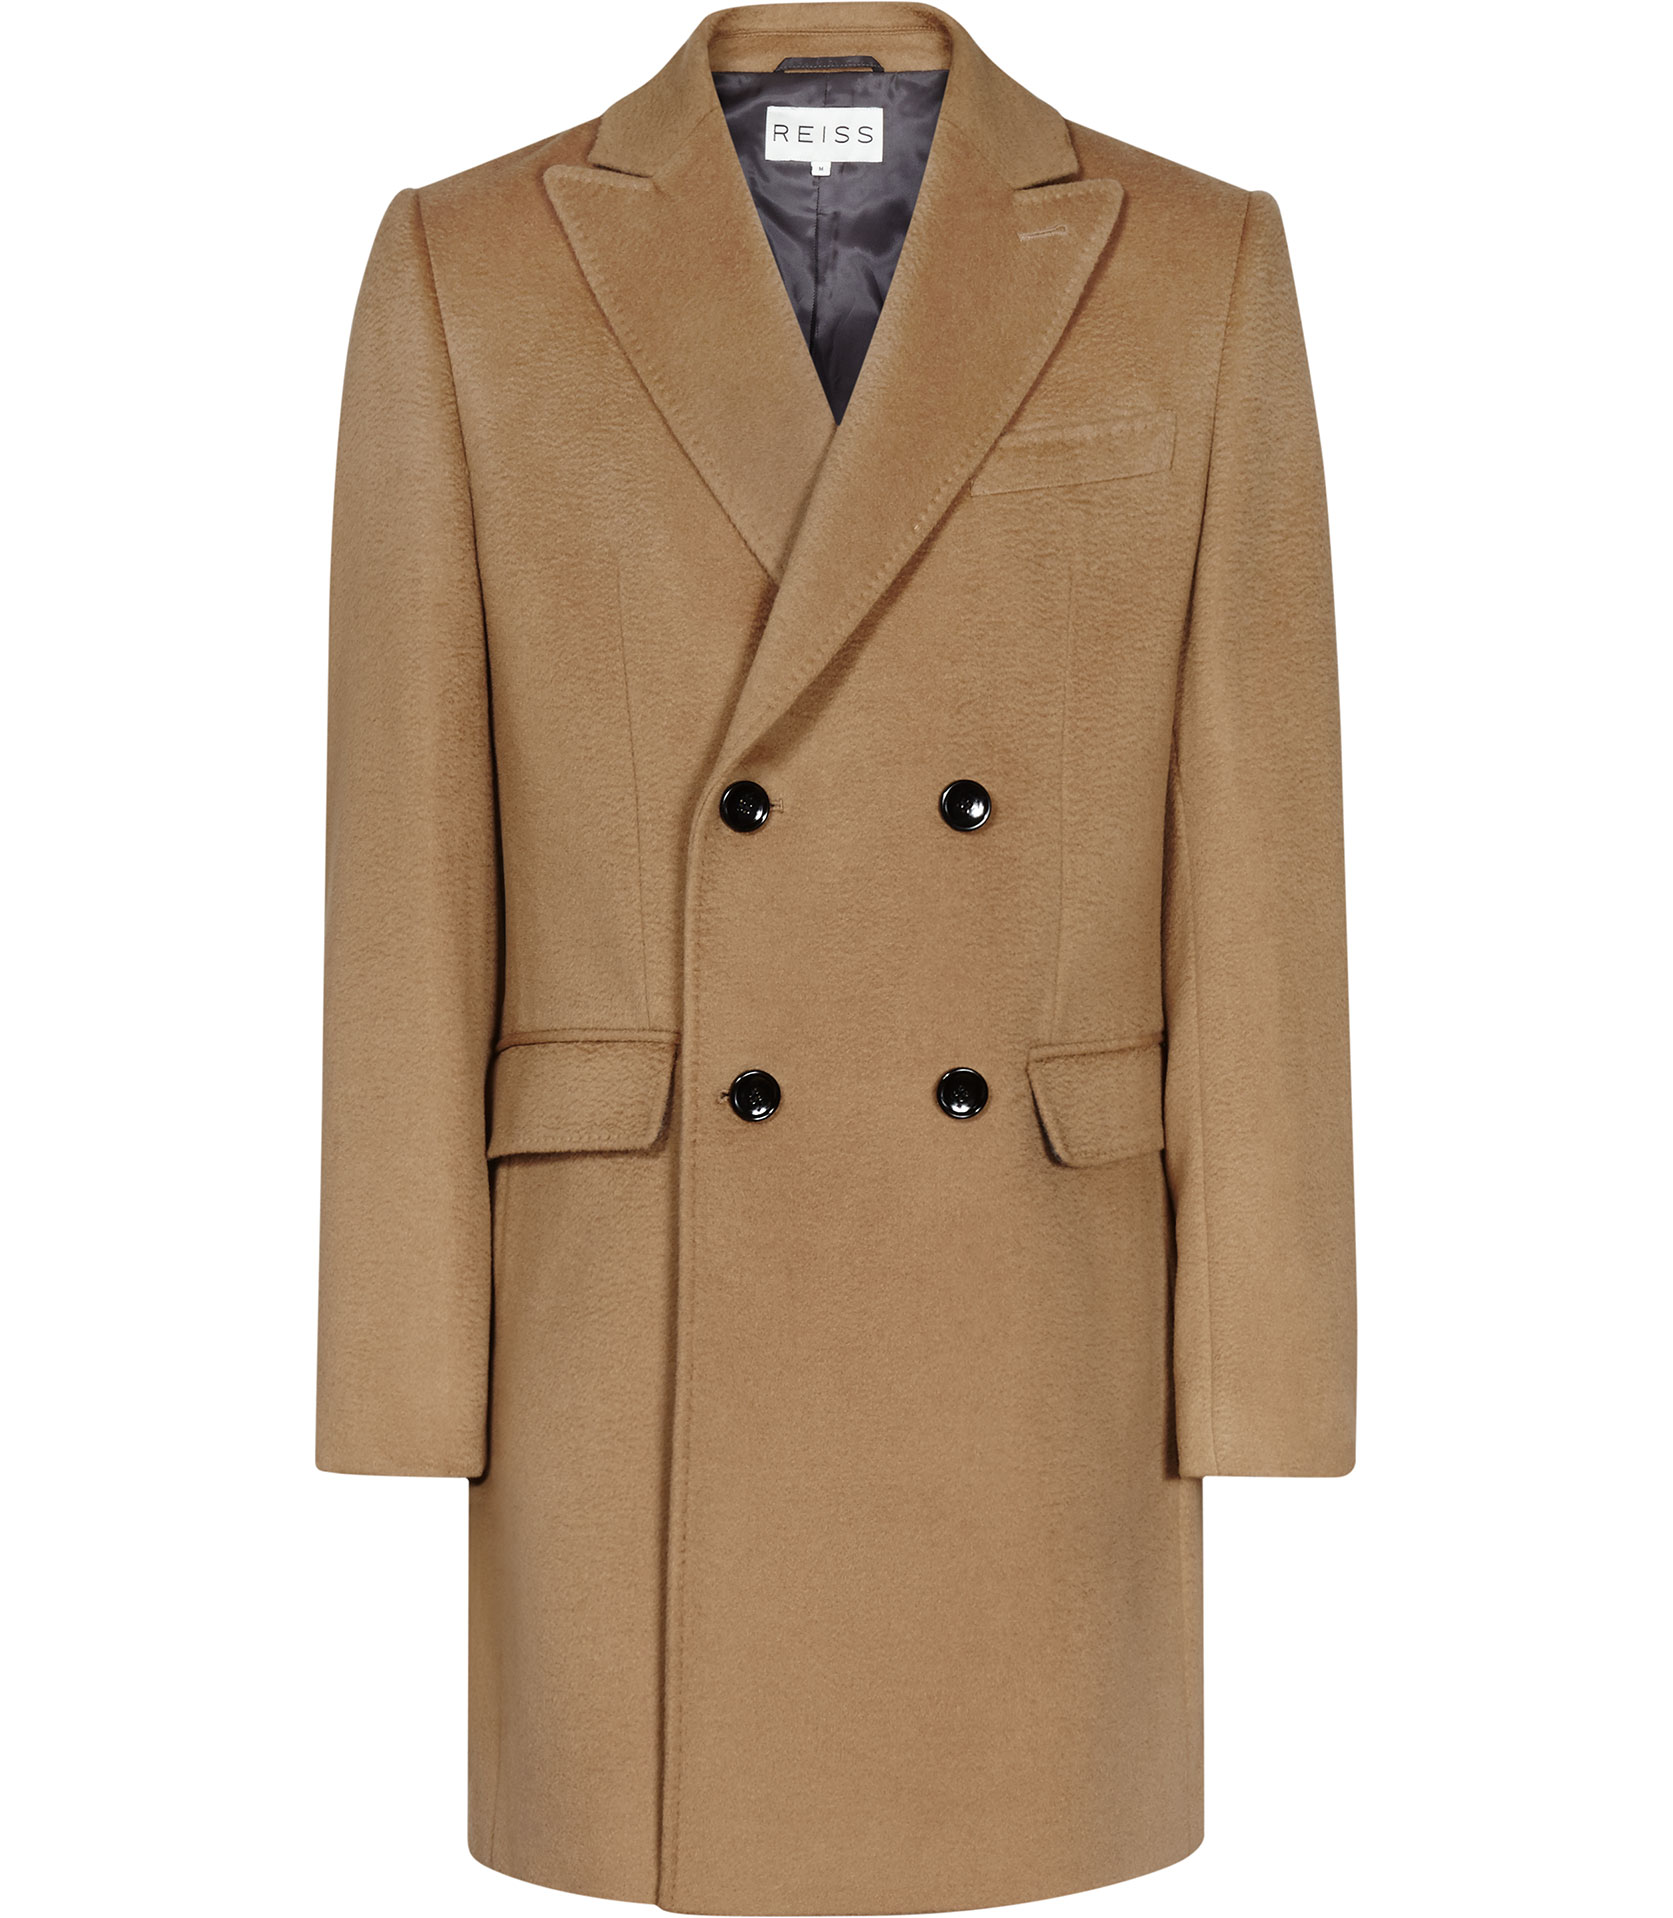 Reiss Kanye Double Breasted Coat Lapel in Camel (Brown) for Men - Lyst